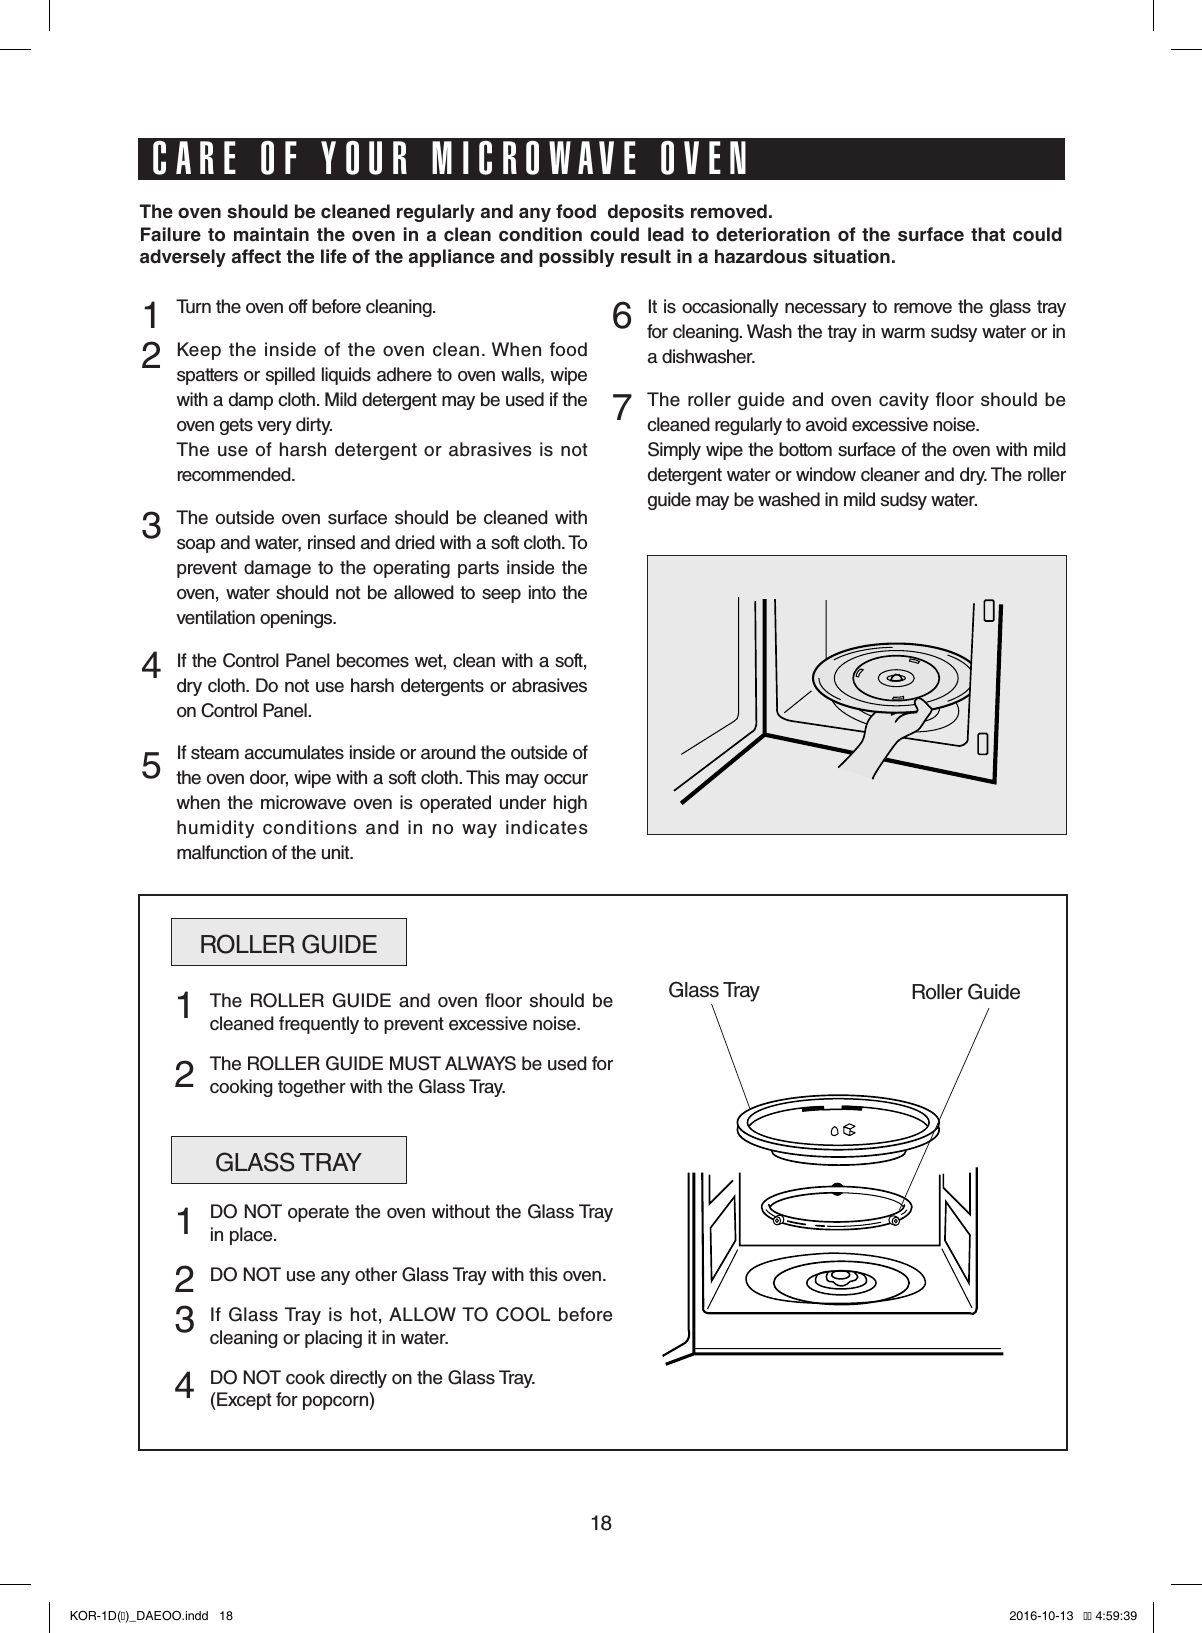 18Turn the oven off before cleaning.Keep  the  inside of  the  oven  clean. When  food spatters or spilled liquids adhere to oven walls, wipe with a damp cloth. Mild detergent may be used if the oven gets very dirty. The  use  of harsh  detergent or  abrasives is not recommended.The outside  oven surface should  be cleaned  with soap and water, rinsed and dried with a soft cloth. To prevent  damage to the operating  parts inside the oven, water should not be allowed to seep into the ventilation openings.If the Control Panel becomes wet, clean with a soft, dry cloth. Do not use harsh detergents or abrasives on Control Panel.If steam accumulates inside or around the outside of the oven door, wipe with a soft cloth. This may occur when the  microwave oven is  operated under high humidity  conditions  and  in  no  way  indicates malfunction of the unit.It is occasionally necessary to remove the glass tray for cleaning. Wash the tray in warm sudsy water or in a dishwasher.The  roller guide and  oven  cavity floor  should  be cleaned regularly to avoid excessive noise. Simply wipe the bottom surface of the oven with mild detergent water or window cleaner and dry. The roller guide may be washed in mild sudsy water.1 2   3    4 567ROLLER GUIDEGlass Tray Roller GuideThe ROLLER  GUIDE  and  oven  floor should  be cleaned frequently to prevent excessive noise.The ROLLER GUIDE MUST ALWAYS be used for cooking together with the Glass Tray.1  2GLASS TRAYDO NOT operate the oven without the Glass Tray in place.DO NOT use any other Glass Tray with this oven.If  Glass Tray is  hot, ALLOW TO  COOL  before cleaning or placing it in water.DO NOT cook directly on the Glass Tray.(Except for popcorn)1  2 3 4The oven should be cleaned regularly and any food  deposits removed.Failure to maintain the oven in a clean condition could lead to deterioration of the surface that could adversely affect the life of the appliance and possibly result in a hazardous situation.CARE OF YOUR MICROWAVE OVENKOR-1D(�)_DAEOO.indd   18 2016-10-13   �� 4:59:39